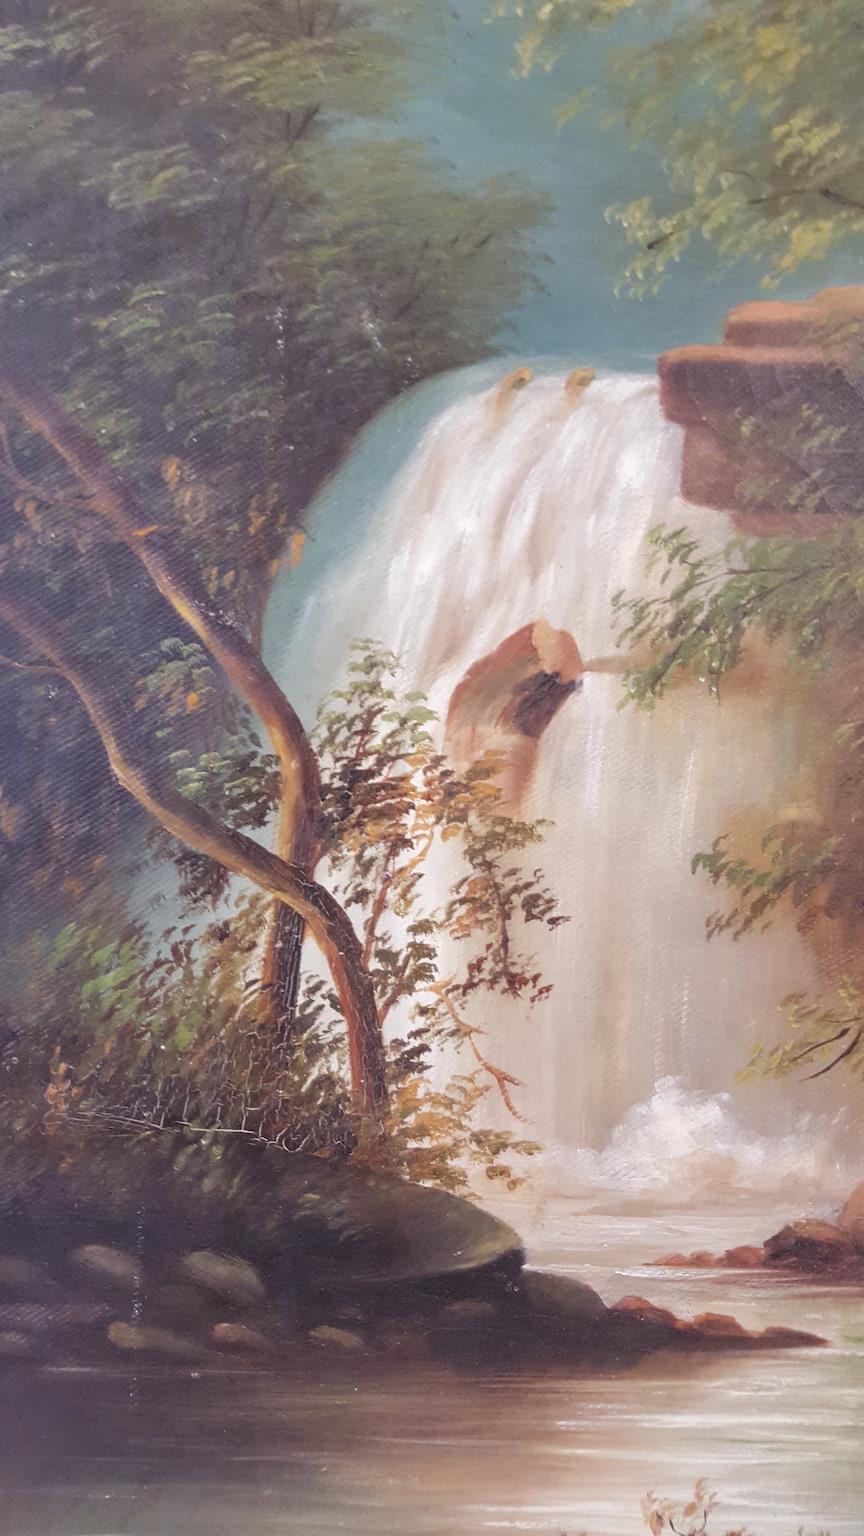 An unsigned, unframed, oil painting on canvas. This painting is peaceful, charming and in very good condition. It is tacked to its original wood stretcher bars.